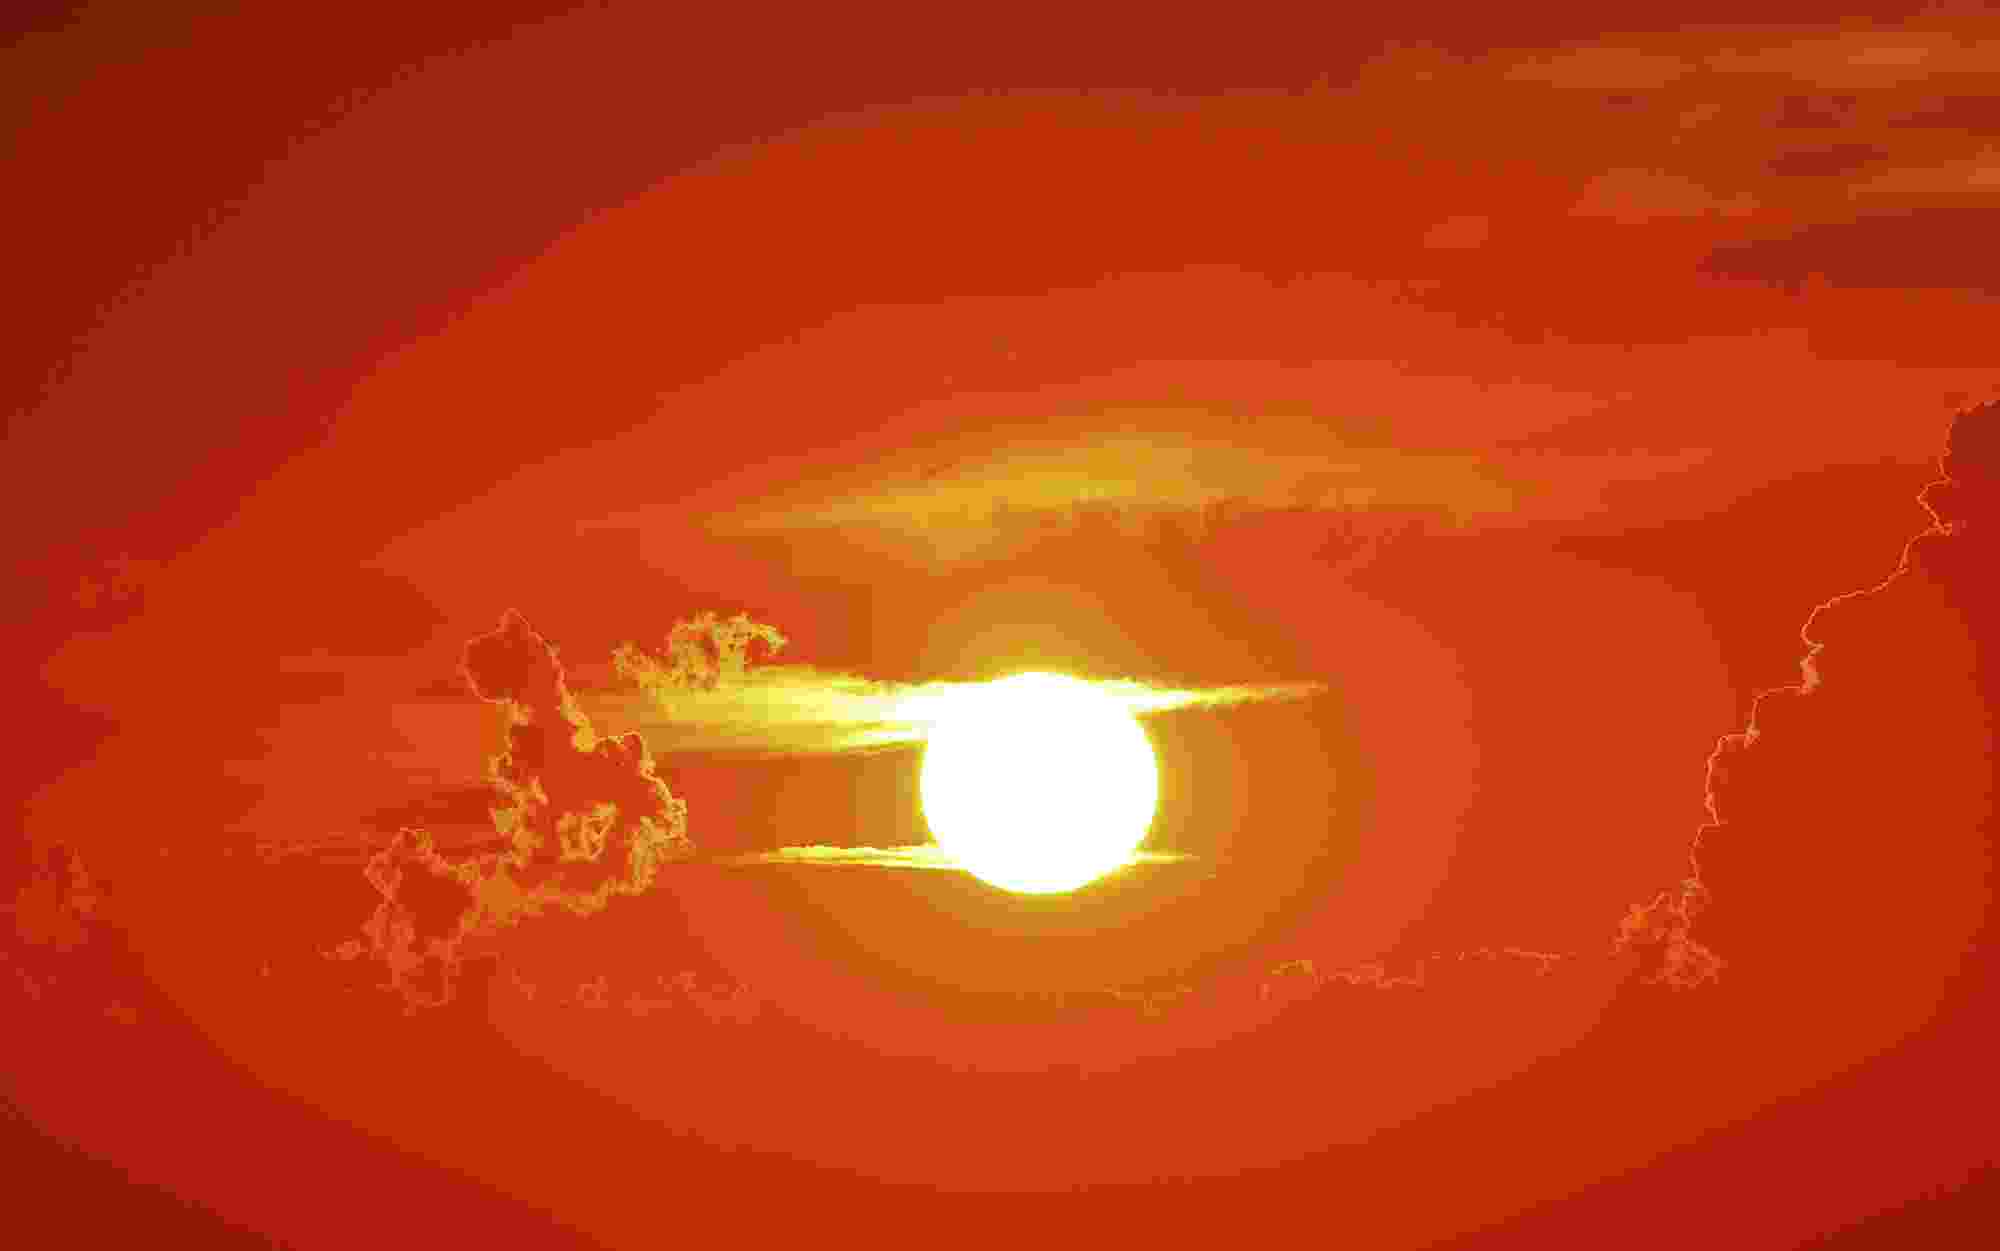 A glowing white sun against a clear, red sky